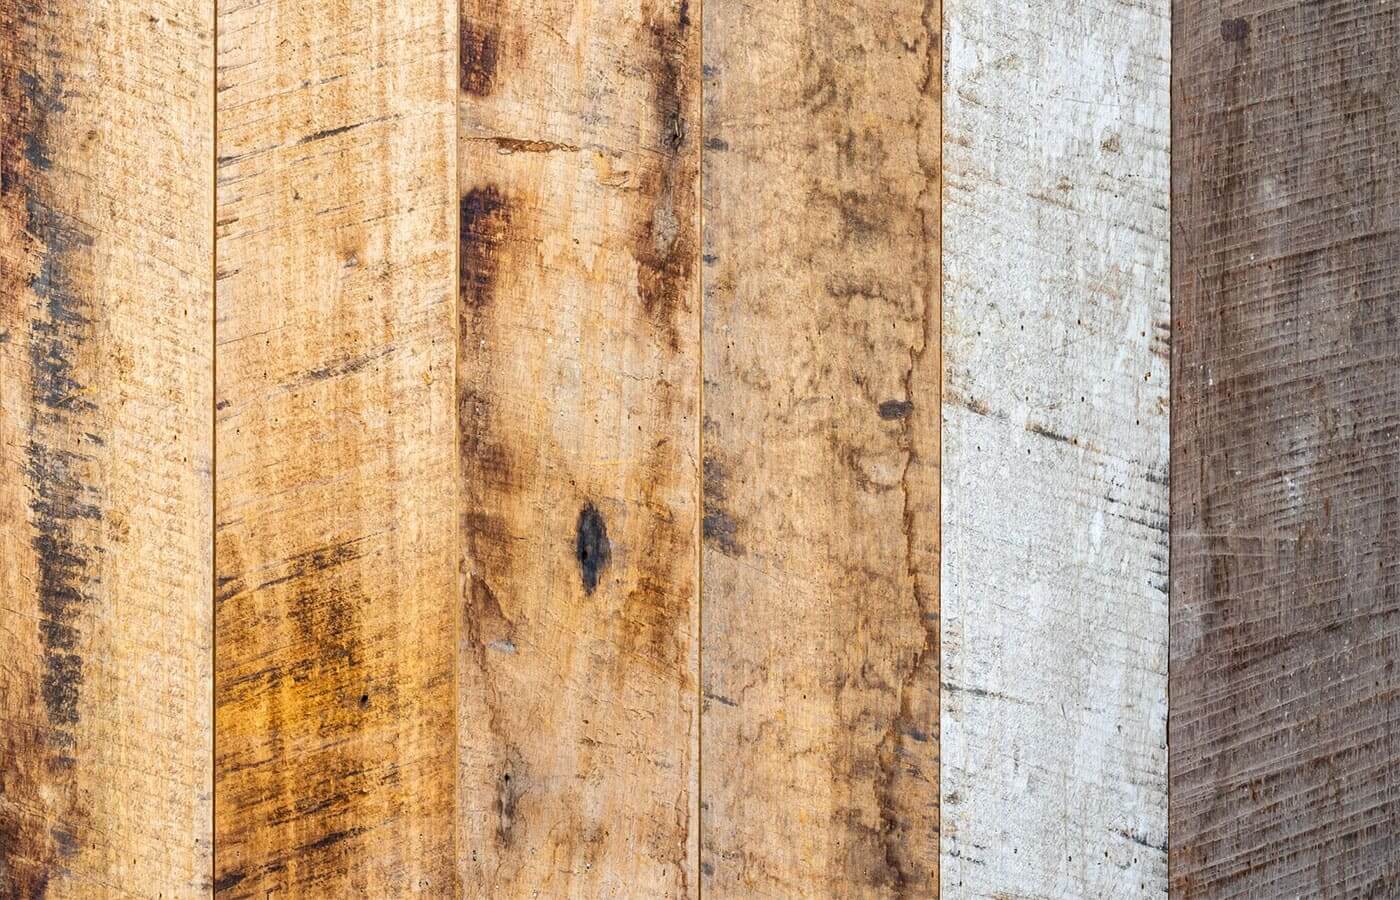 A collection of rustic wooden planks aligned next to each other